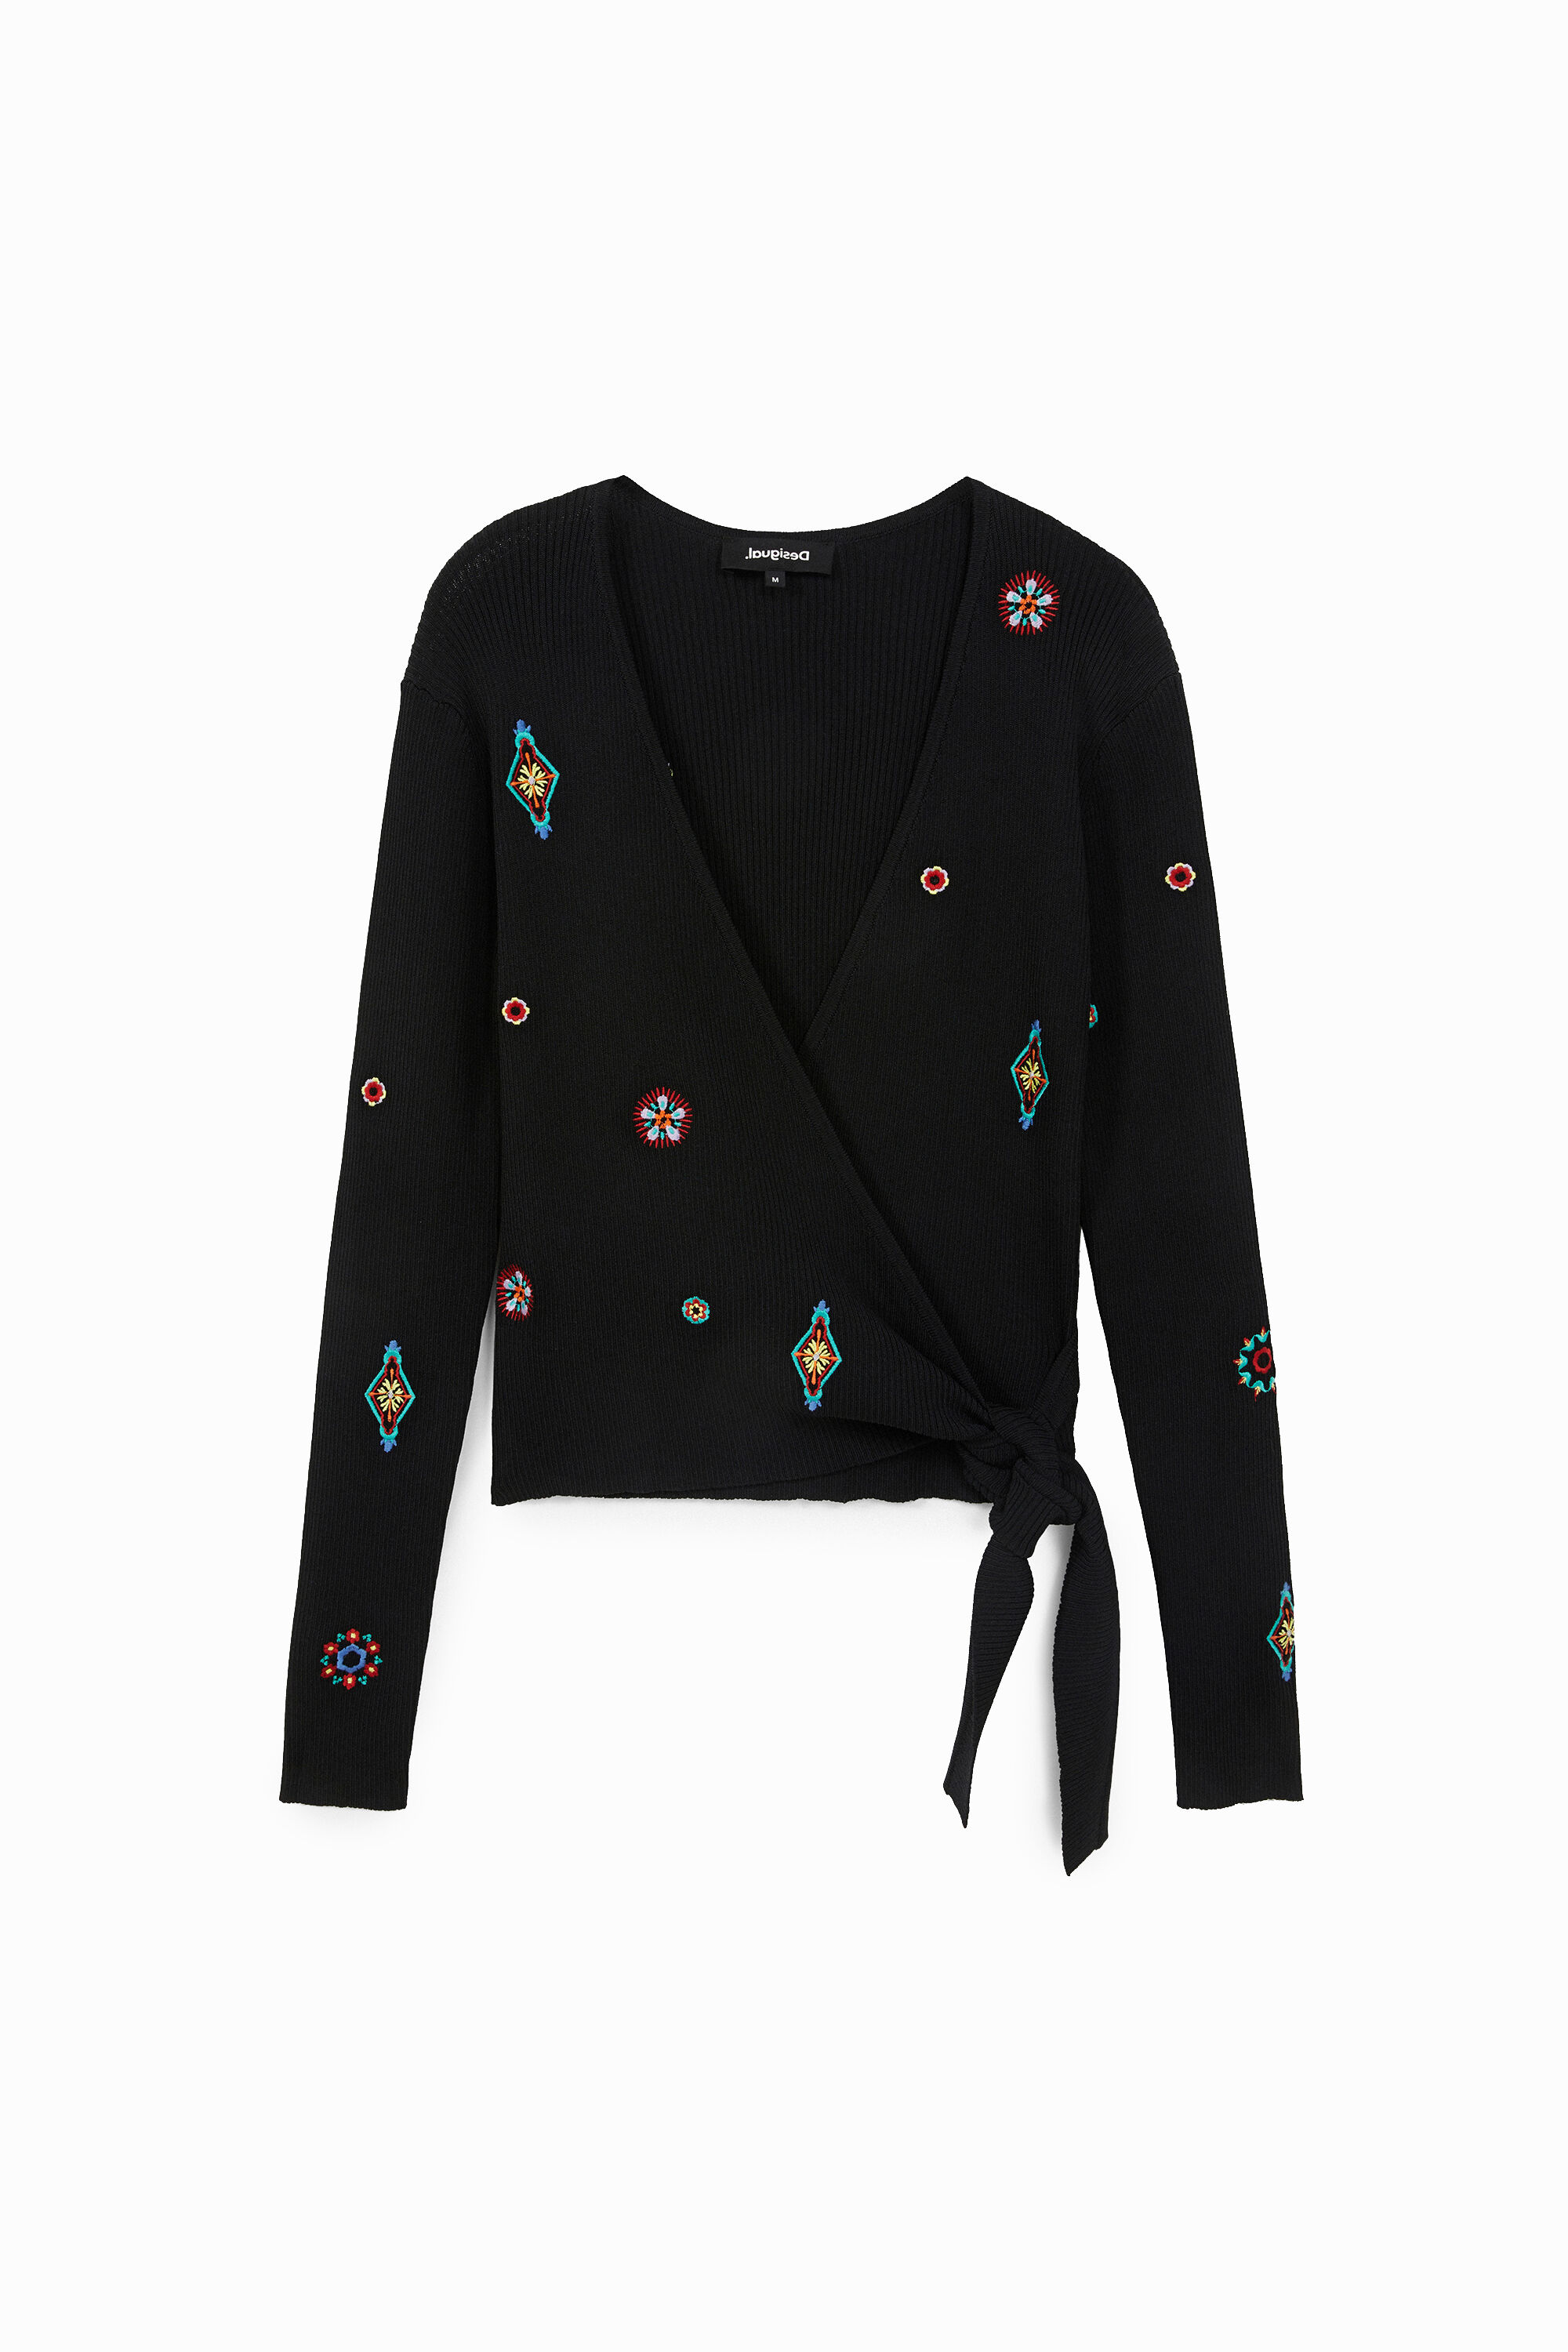 Desigual Knit Jumper Knotted In Black